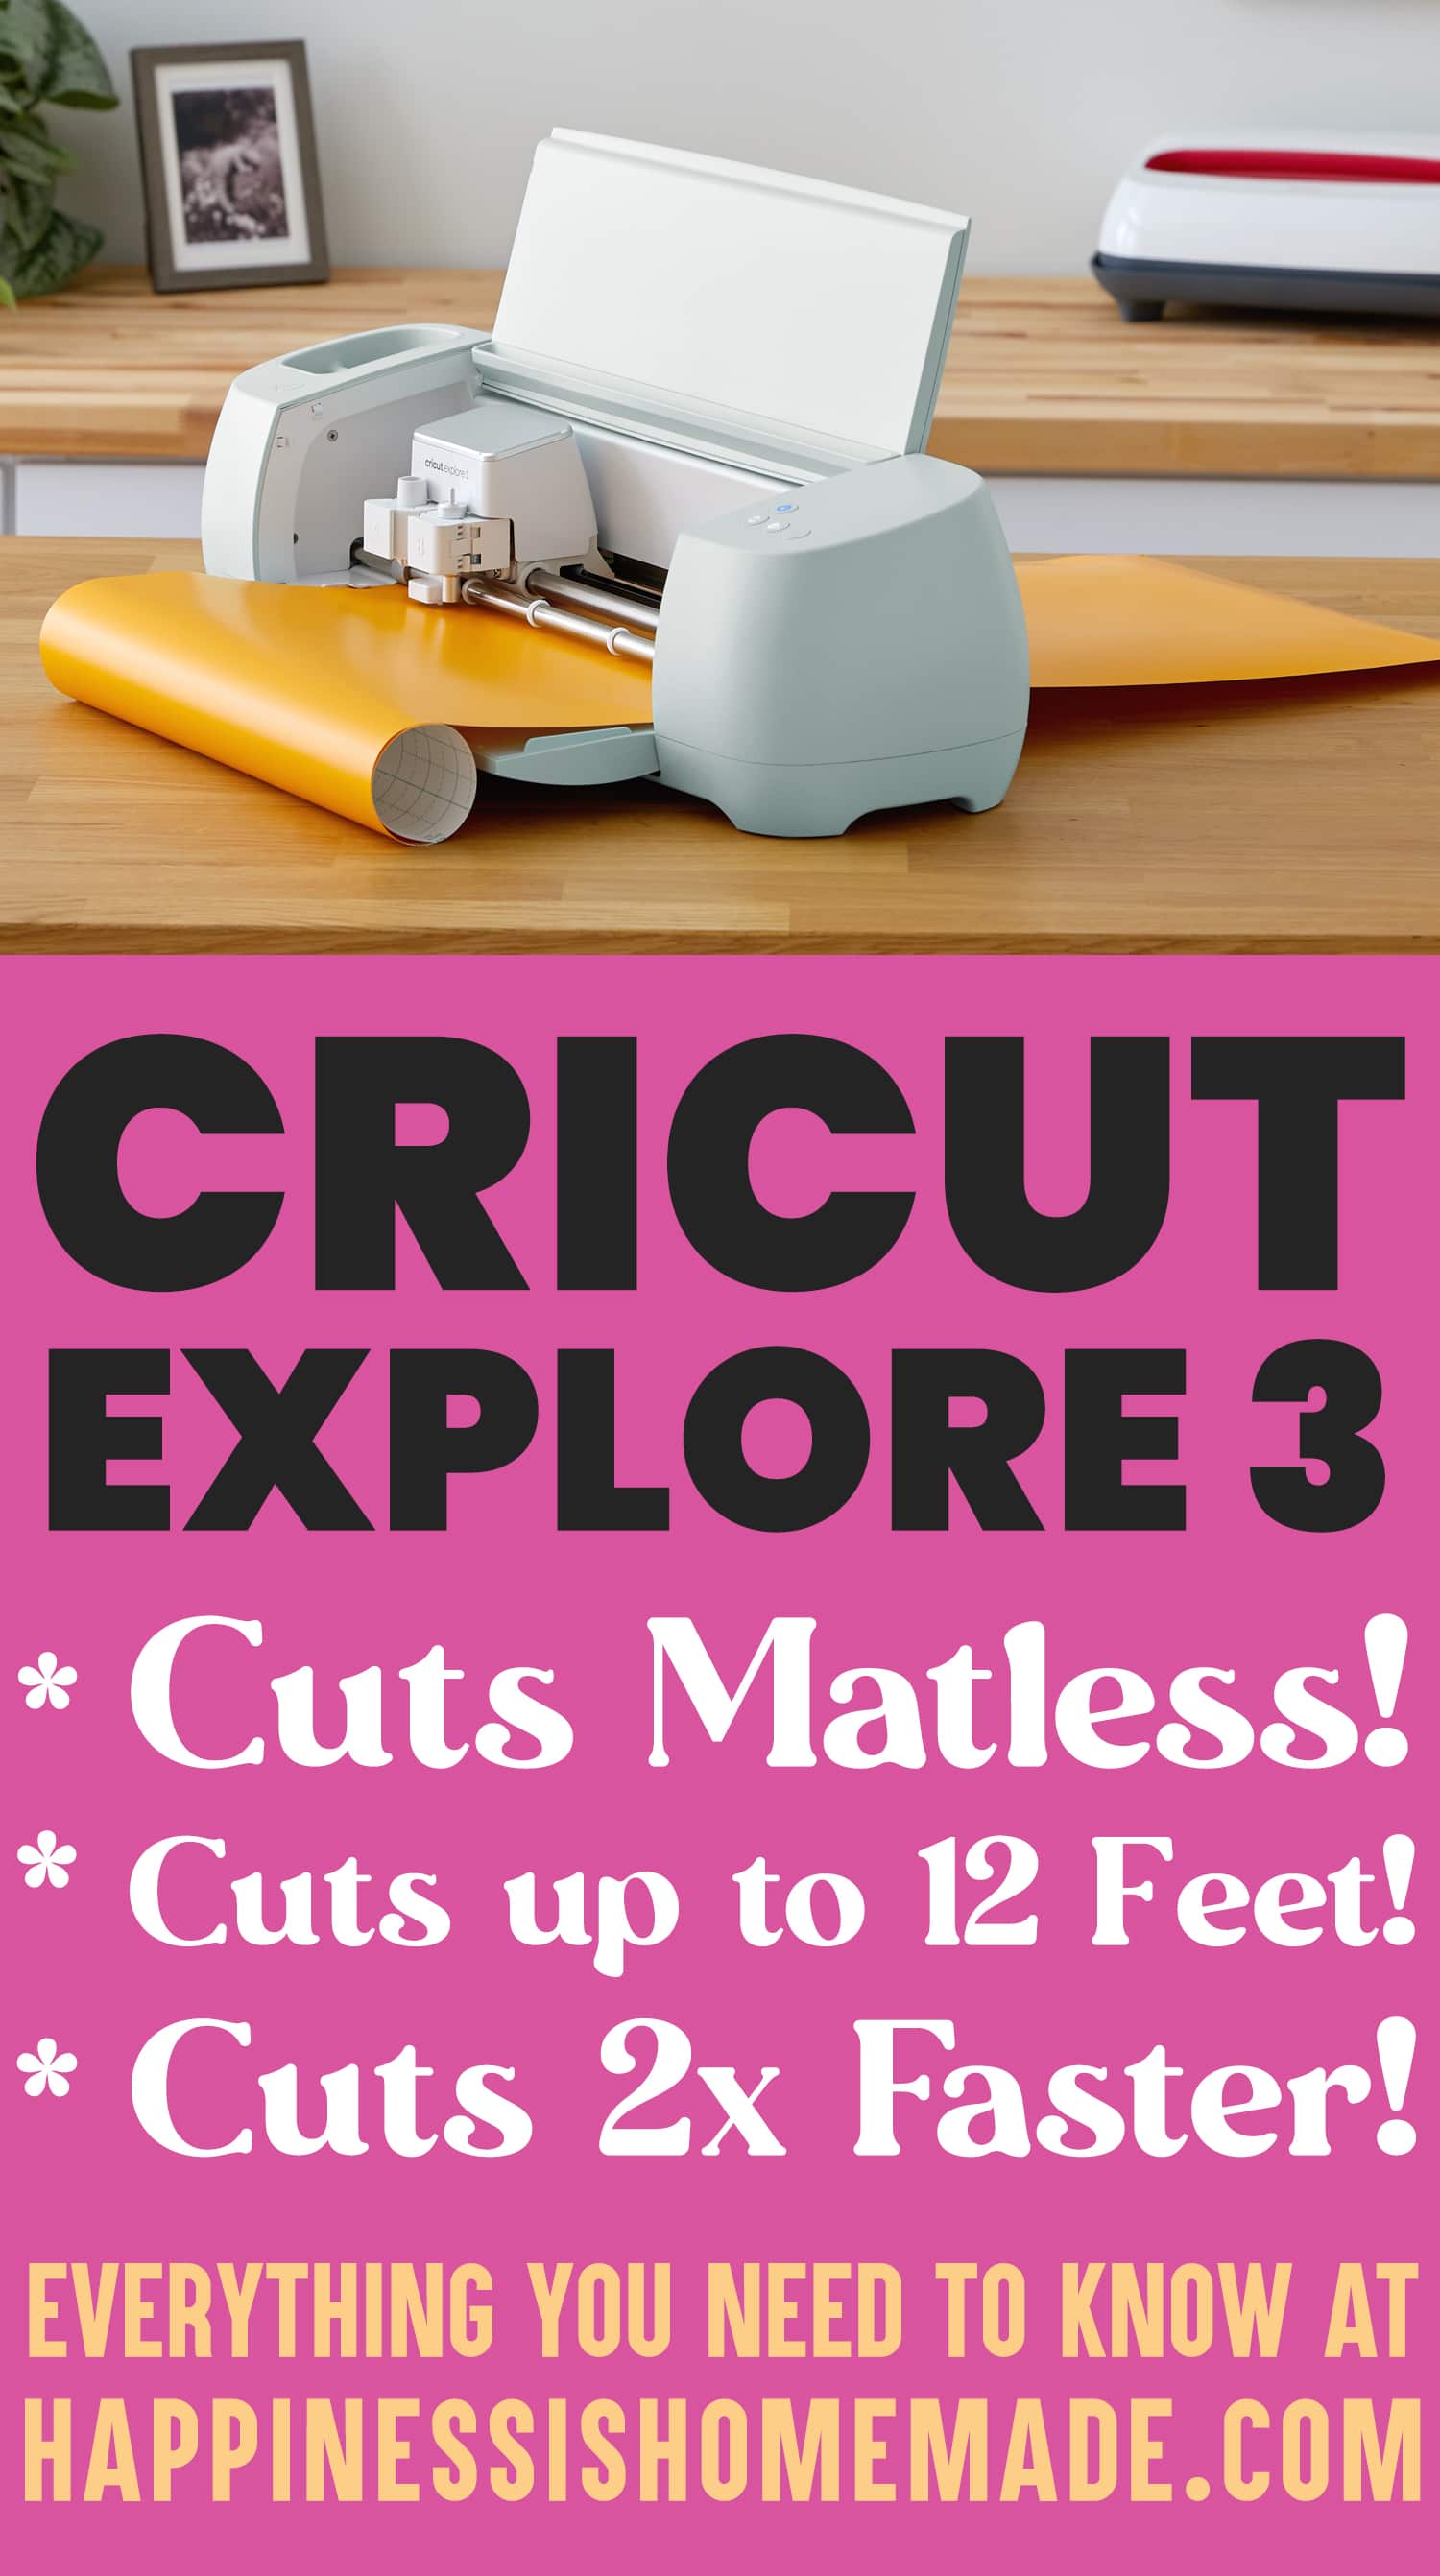 All you need to know about Cricut Mats!